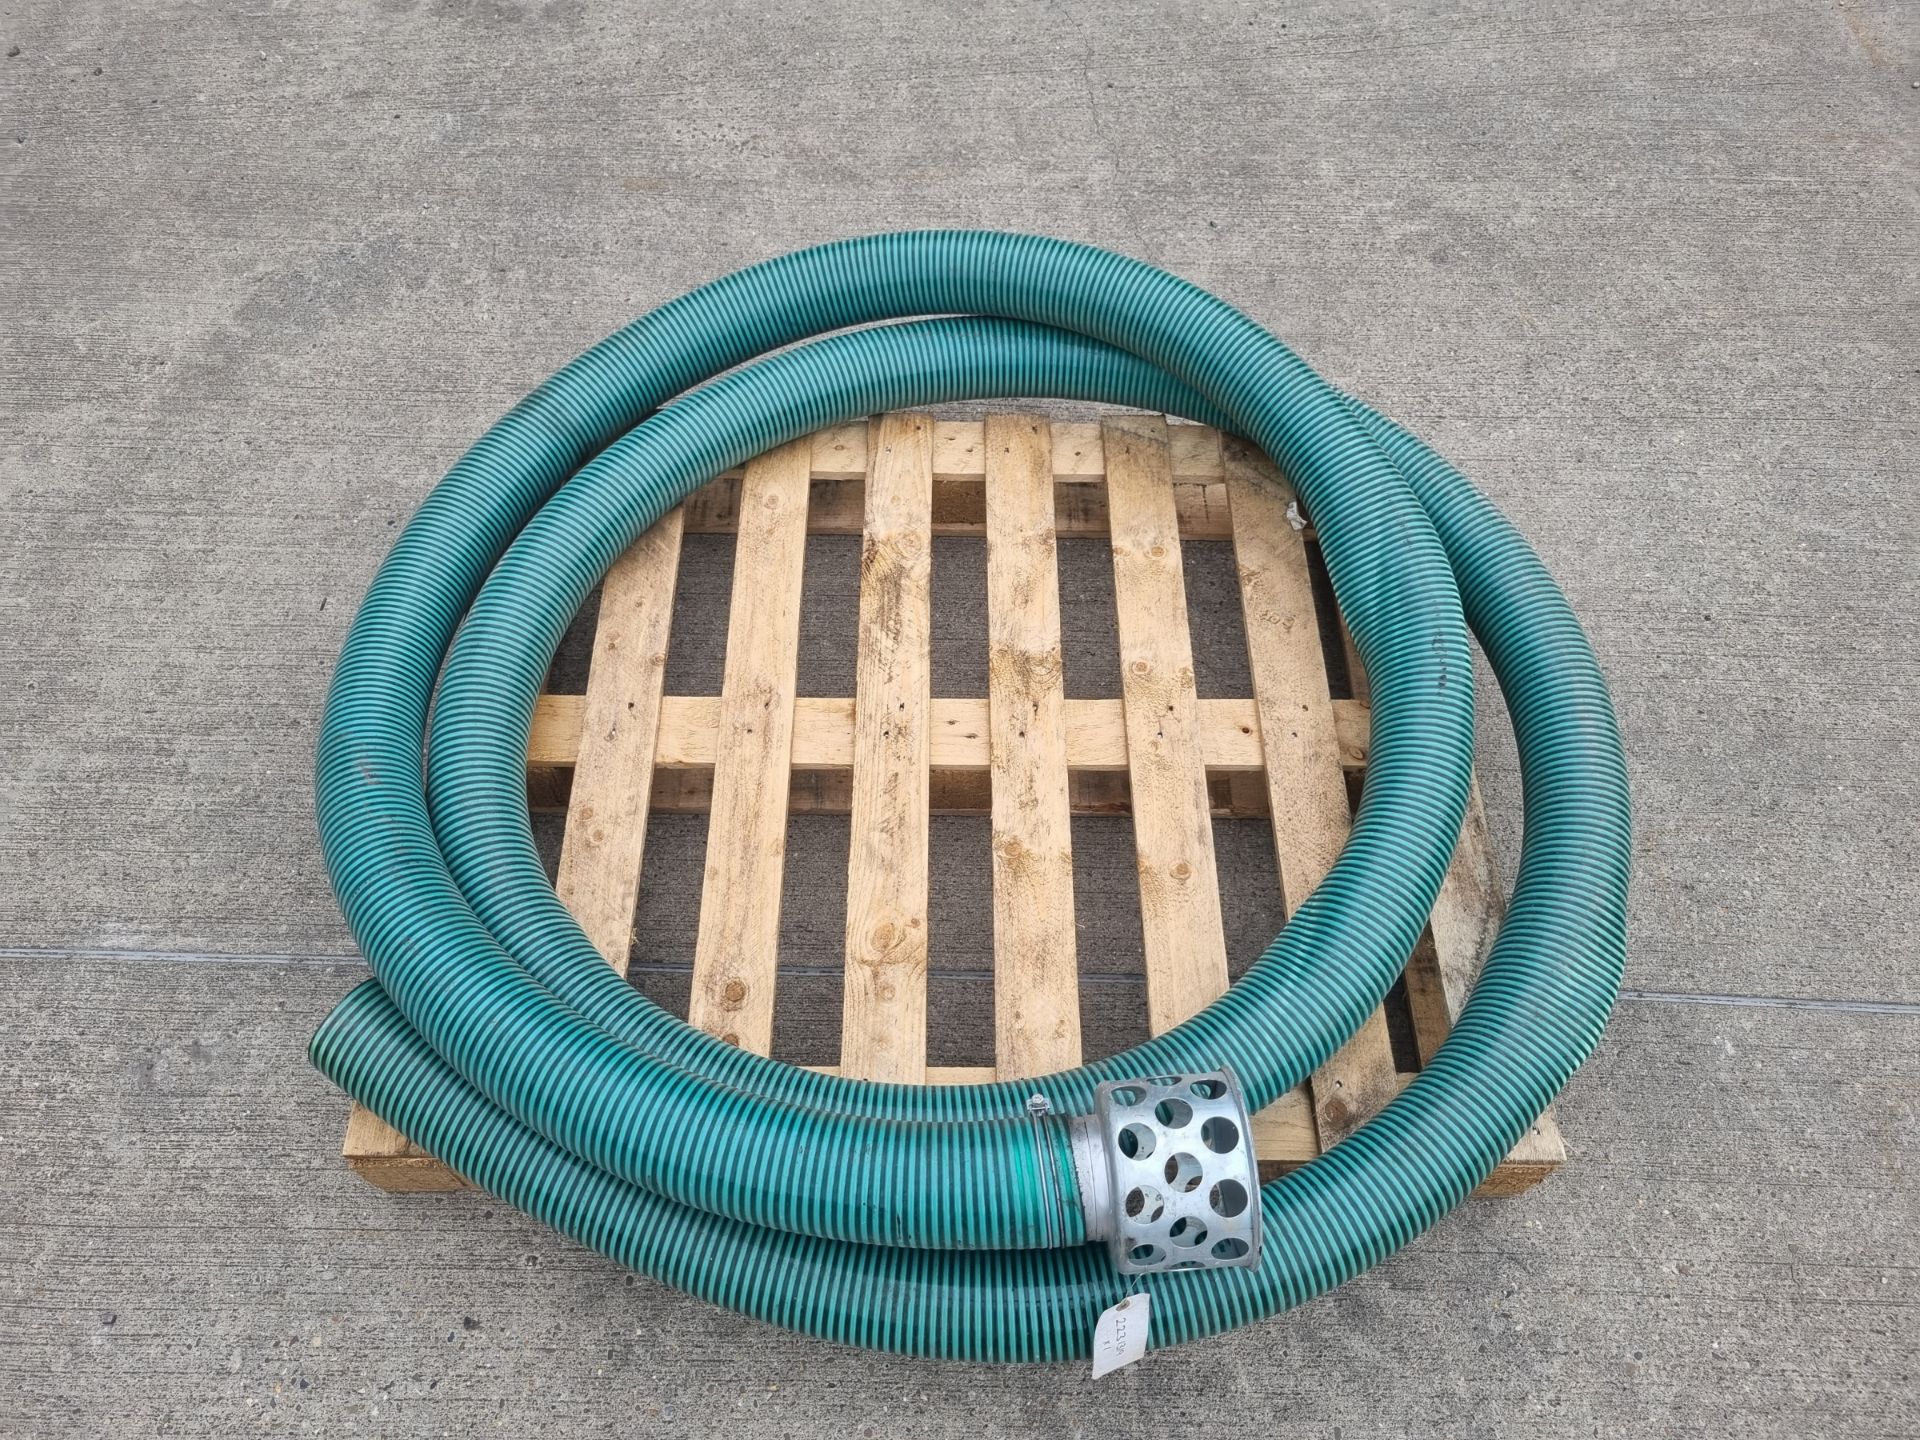 Can strainer water filter & hose - Unknown length - Image 2 of 5